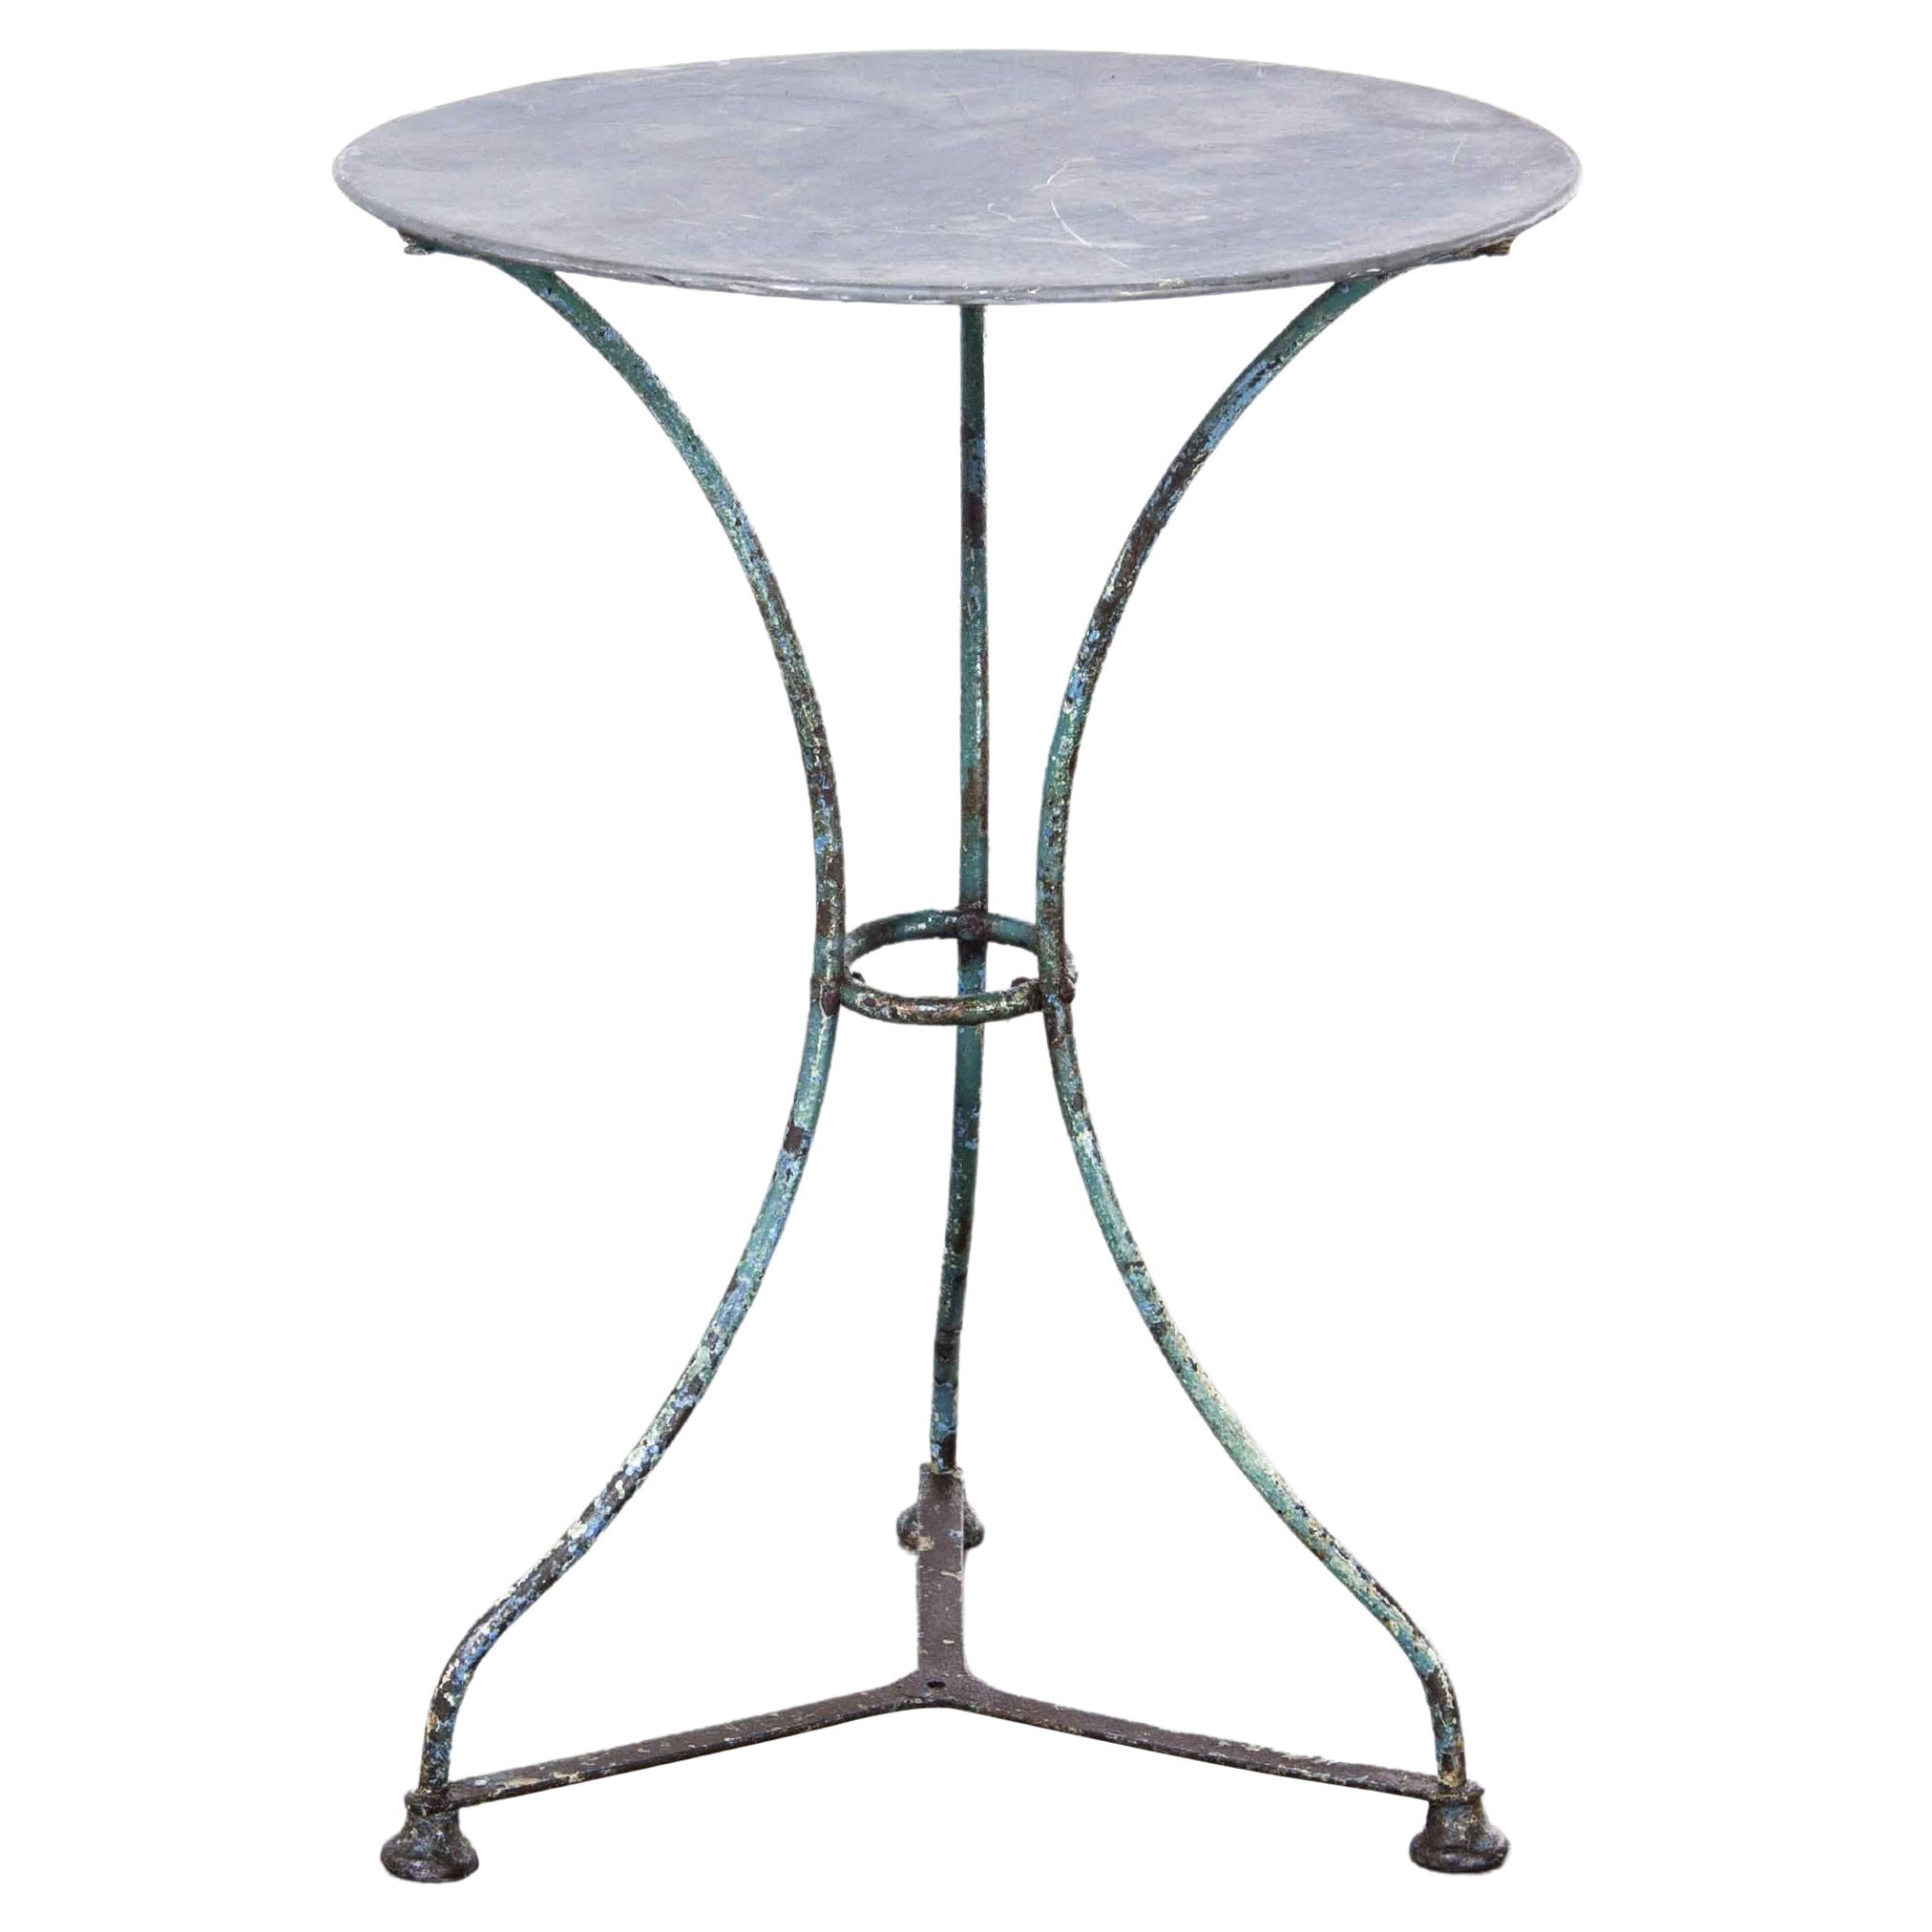 Cool Industrial Distressed Wood Table with Metal Legs For Sale at 1stDibs